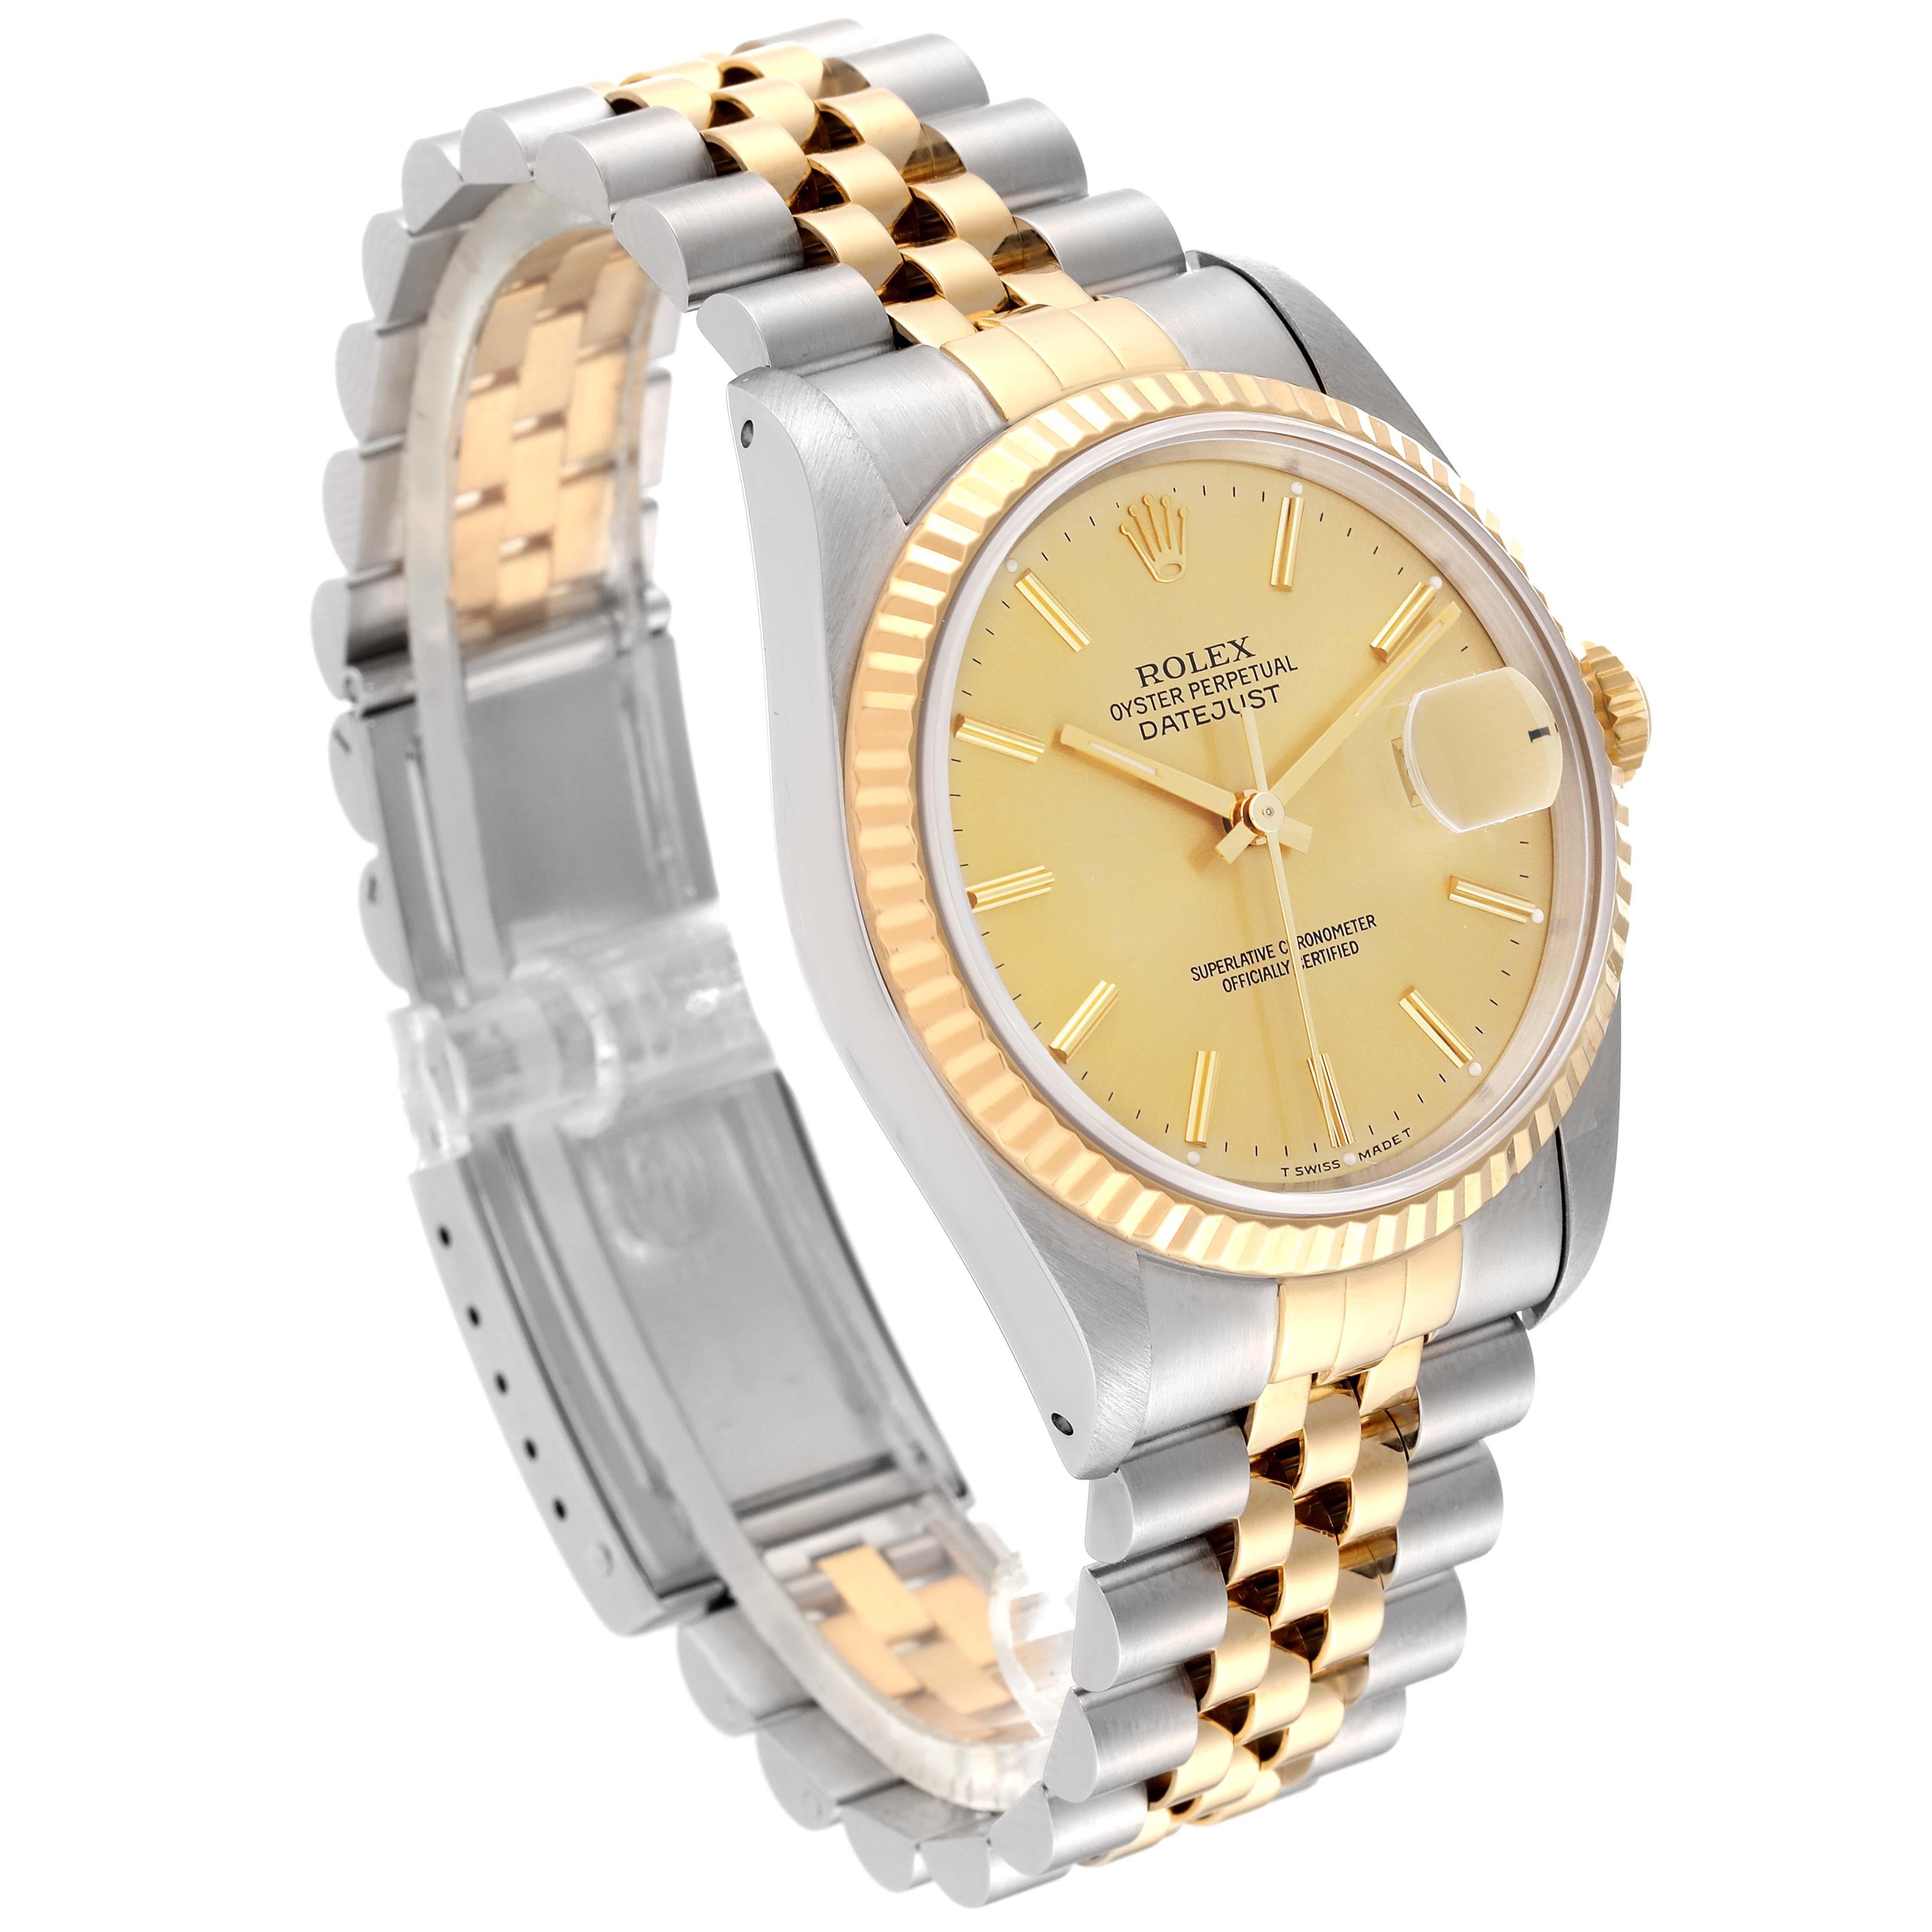 Men's Rolex Datejust 36 Steel Yellow Gold Champagne Dial Mens Watch 16233 For Sale